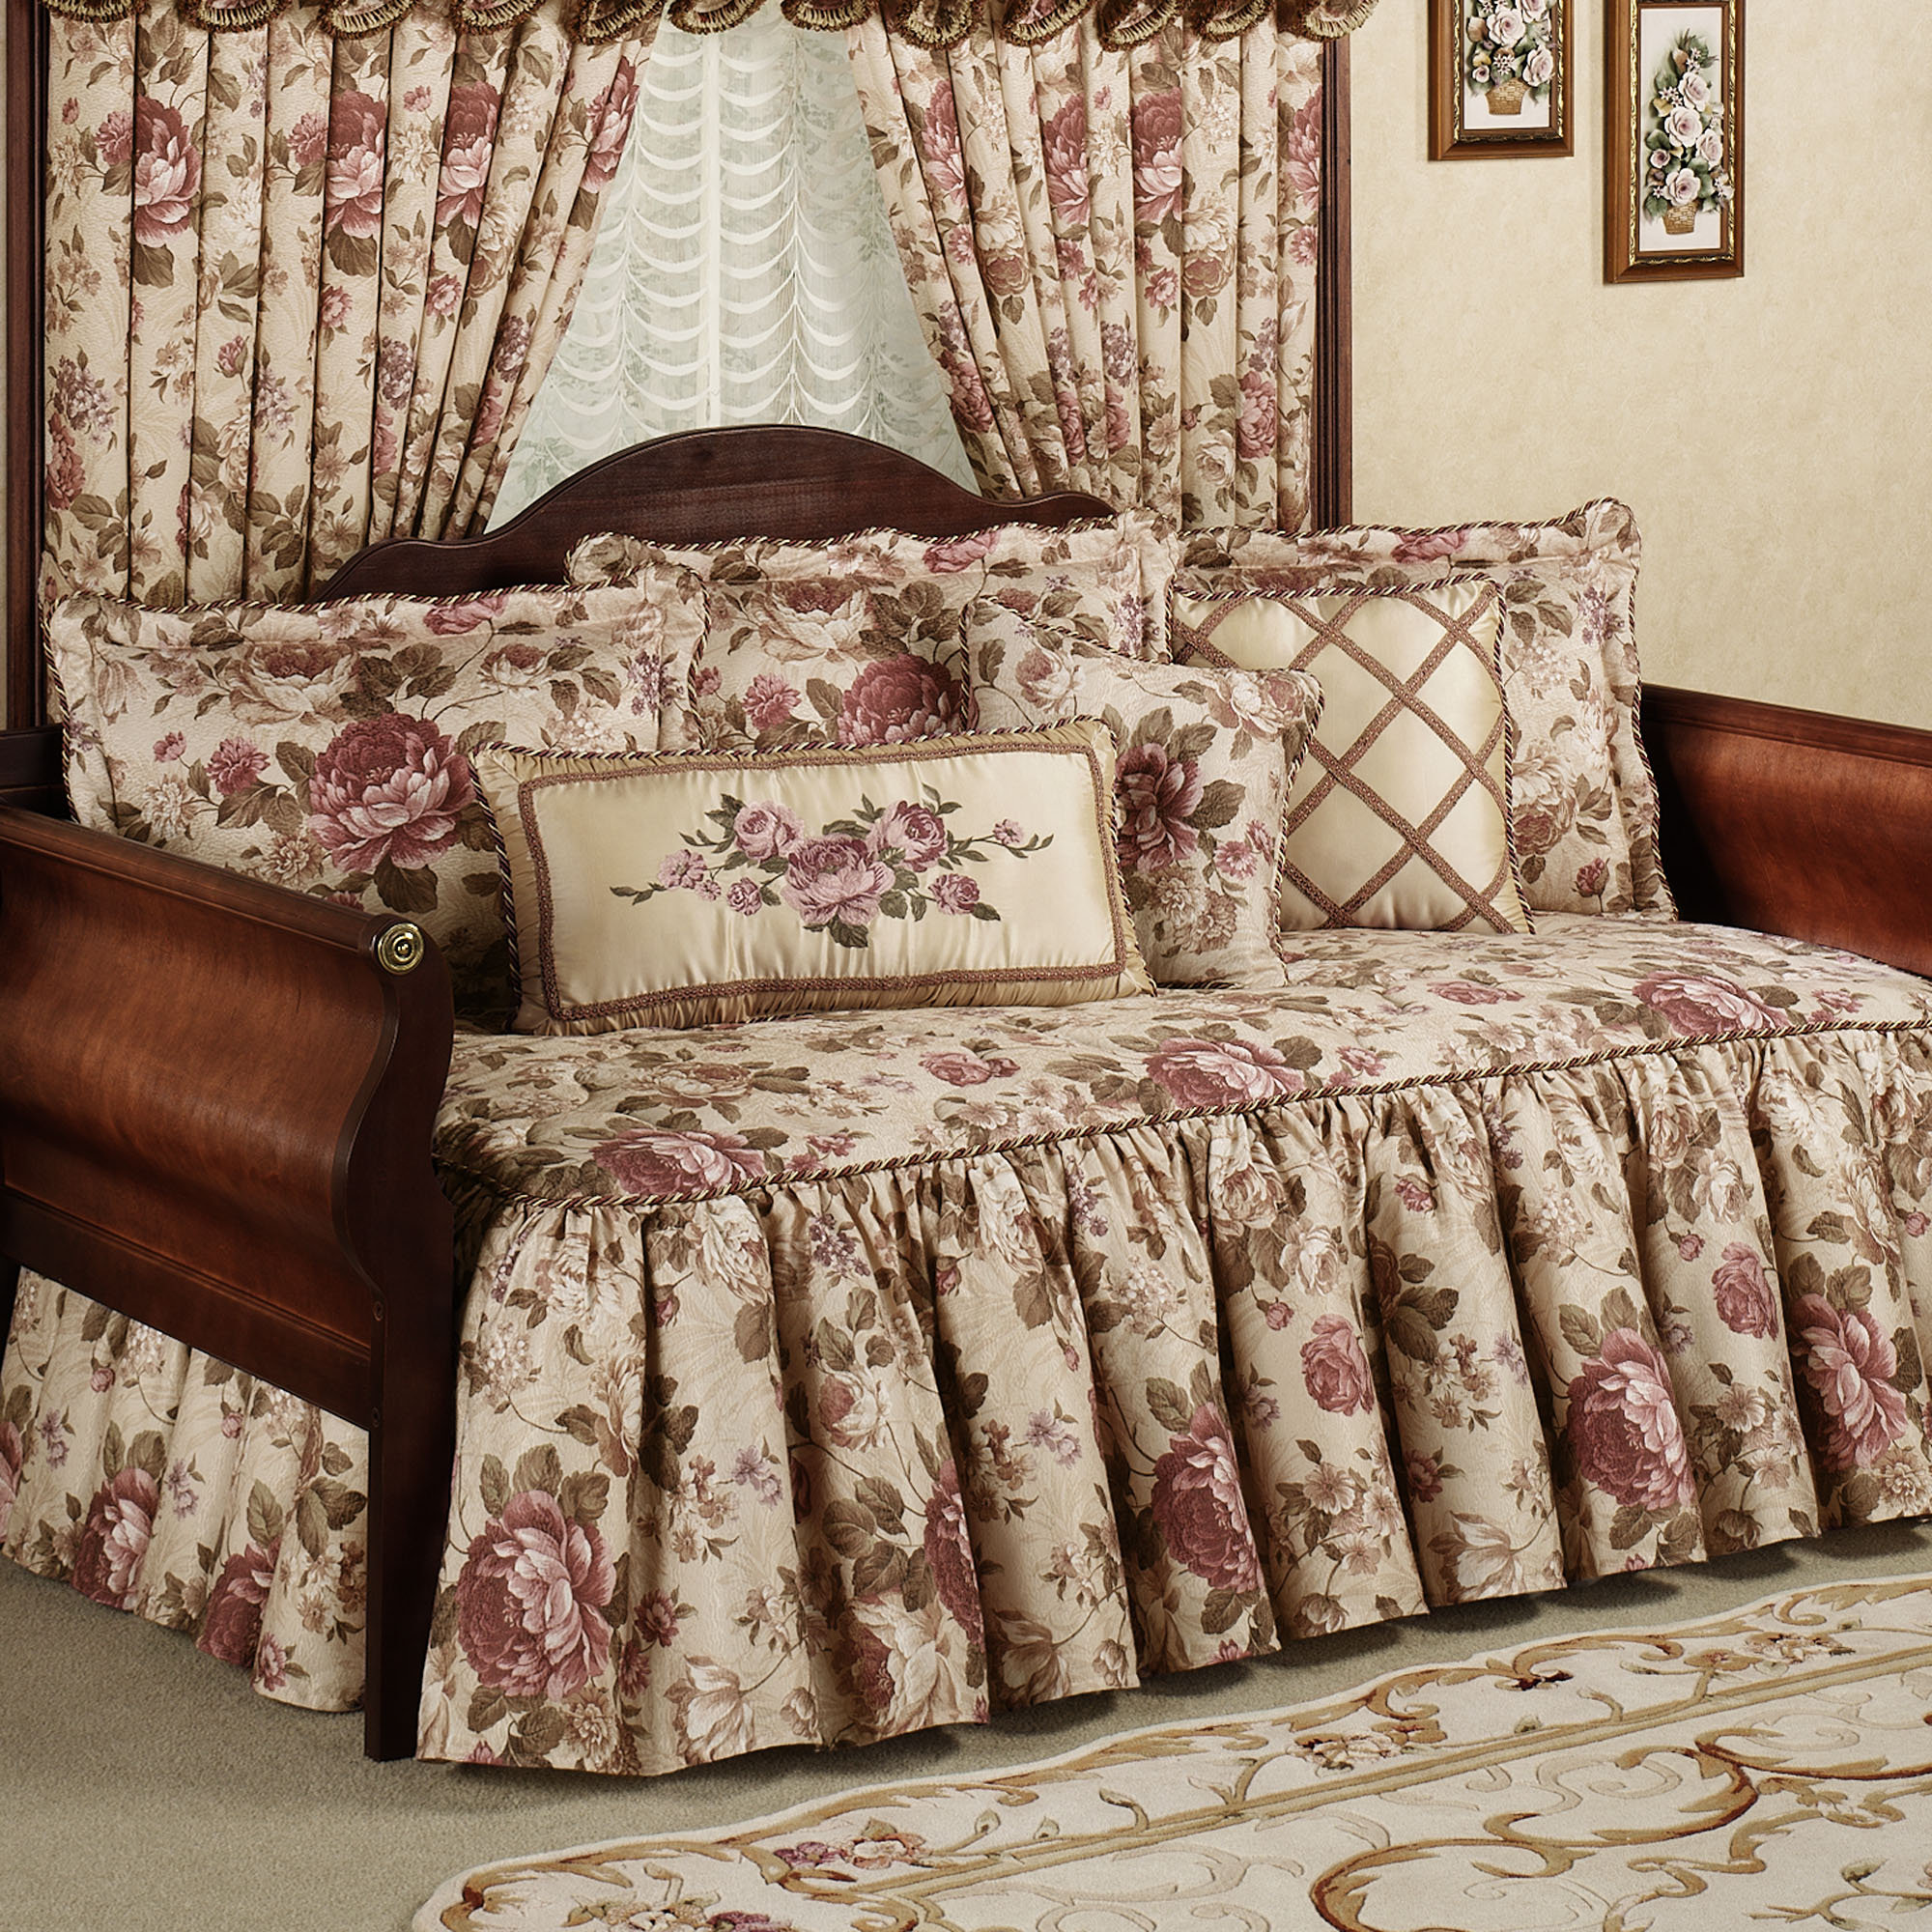 floral daybed bedding sets photo - 4